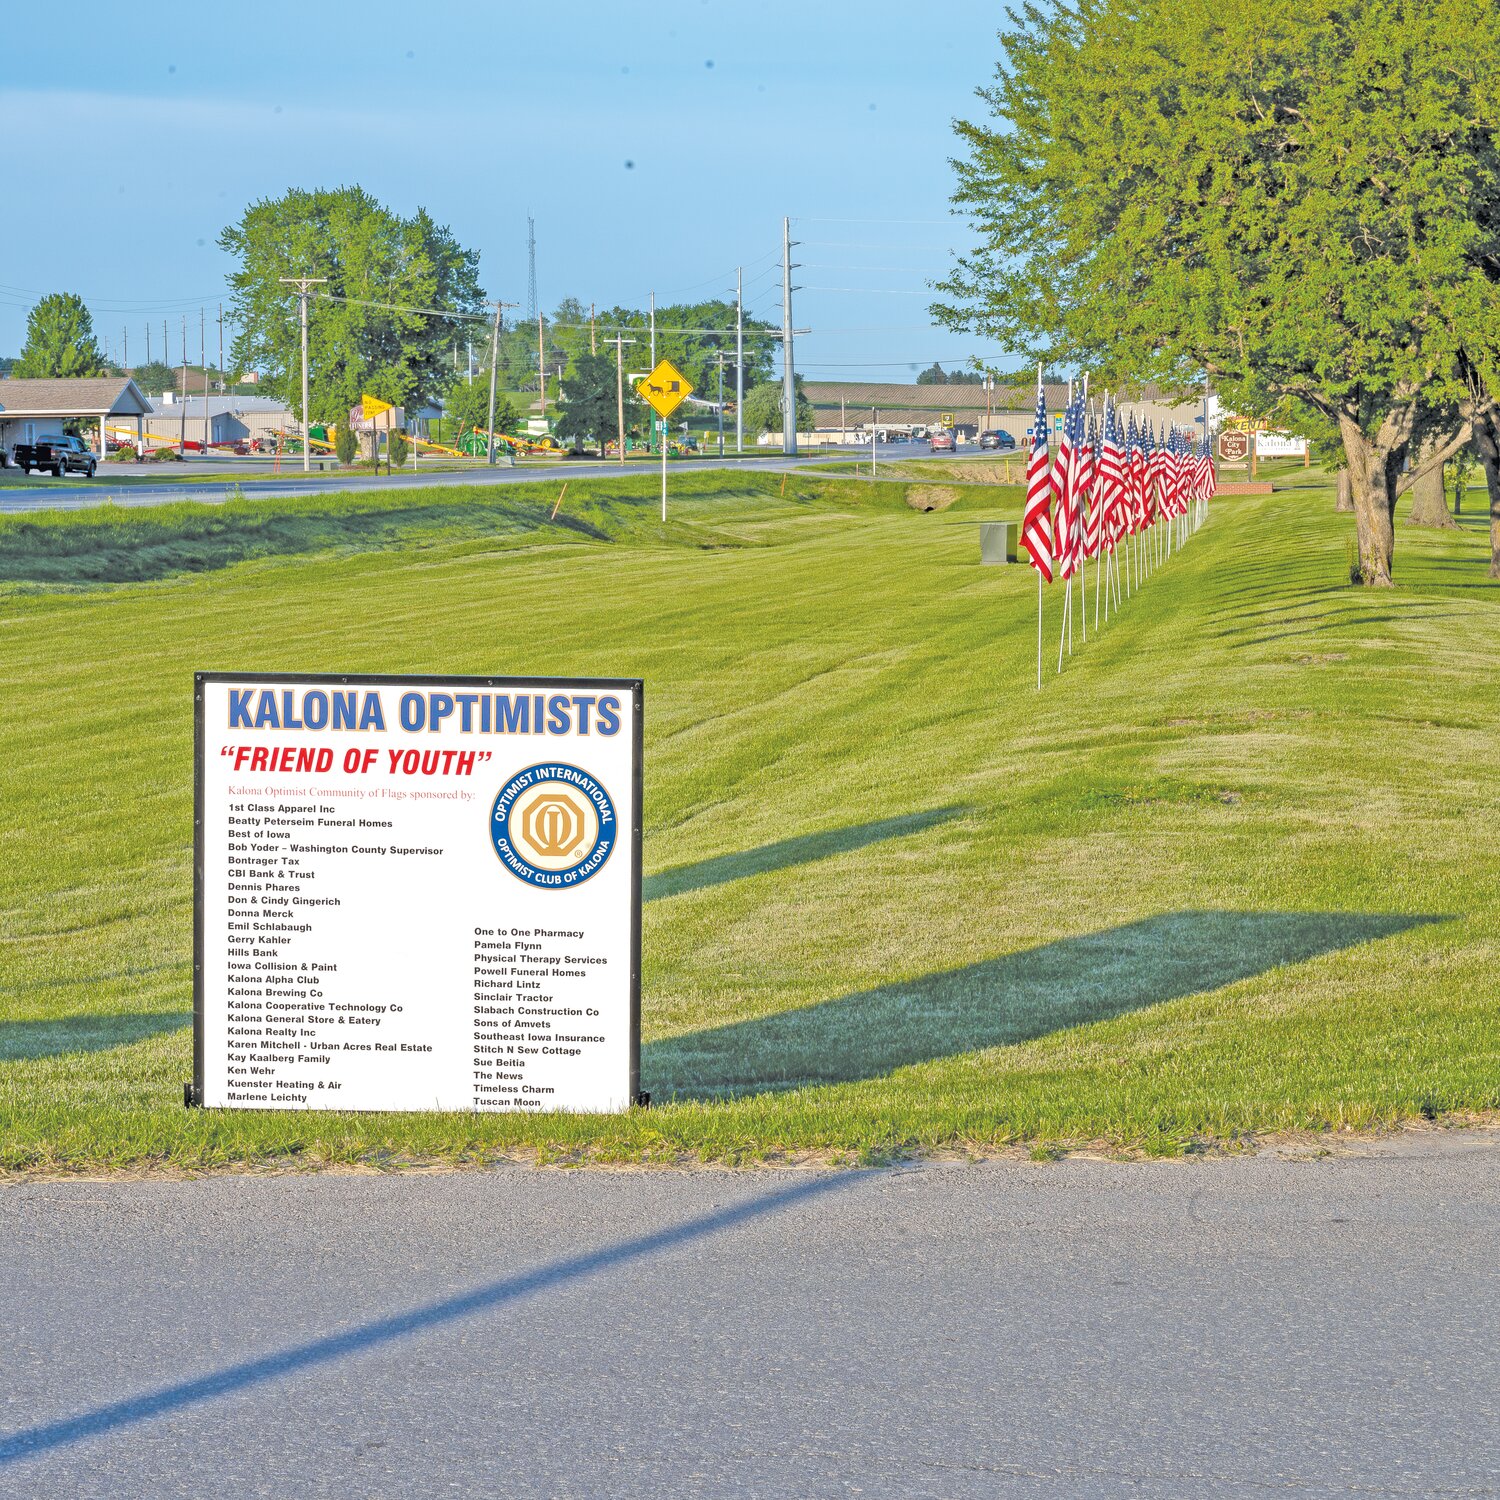 There were 37 flags sponsored by Kalona businesses and individuals flown for the first time Memorial weekend. Sign recognizing flag sponsors is at left (west end of City Park). The flags, located along Southside of Highway 22, will be flown every holiday that the other 360 Optimists Community Of Flags are flown throughout Kalona.